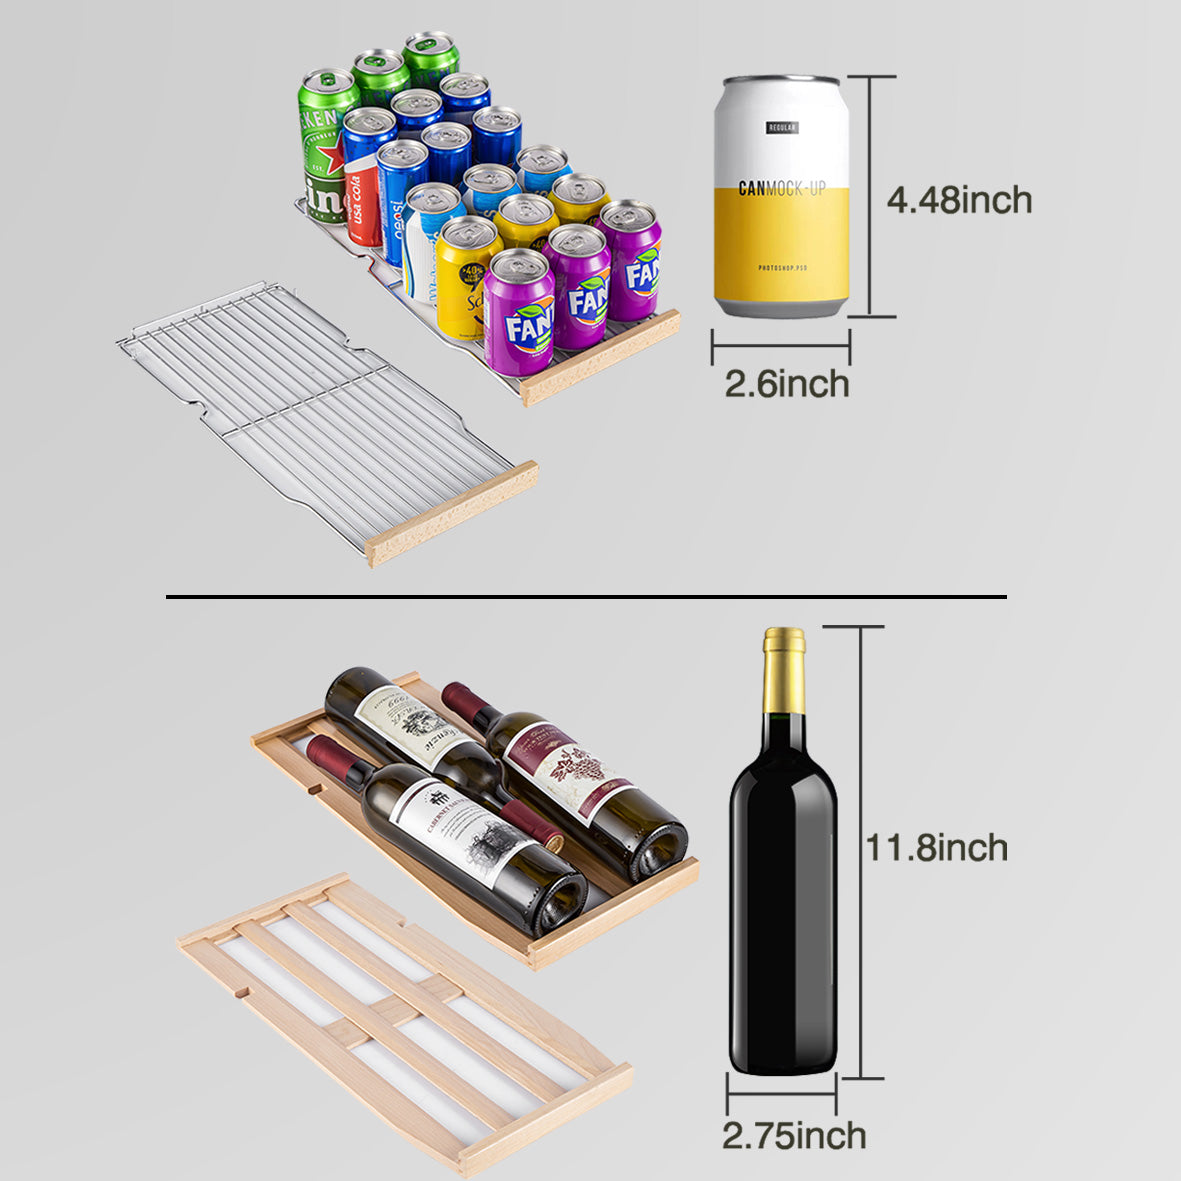 https://cdn.shopify.com/s/files/1/0560/6309/9070/t/9/assets/bodegacooler_24_inches_builtin_dual_zone_18_bottles_and_57_cans_wine_and_beverage_cooler_9-1660205760569.jpg?v=1660205433